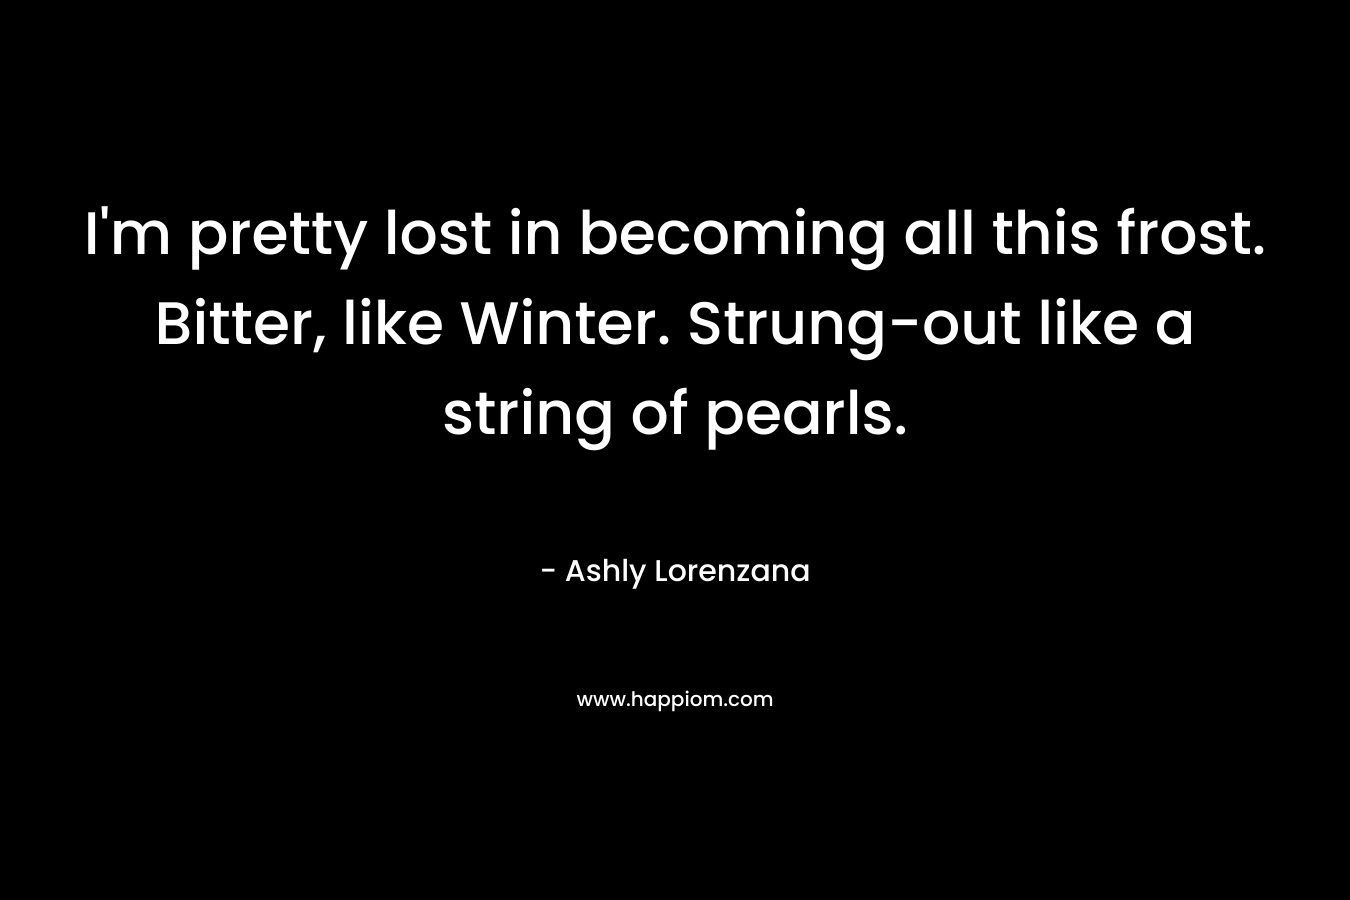 I’m pretty lost in becoming all this frost. Bitter, like Winter. Strung-out like a string of pearls. – Ashly Lorenzana